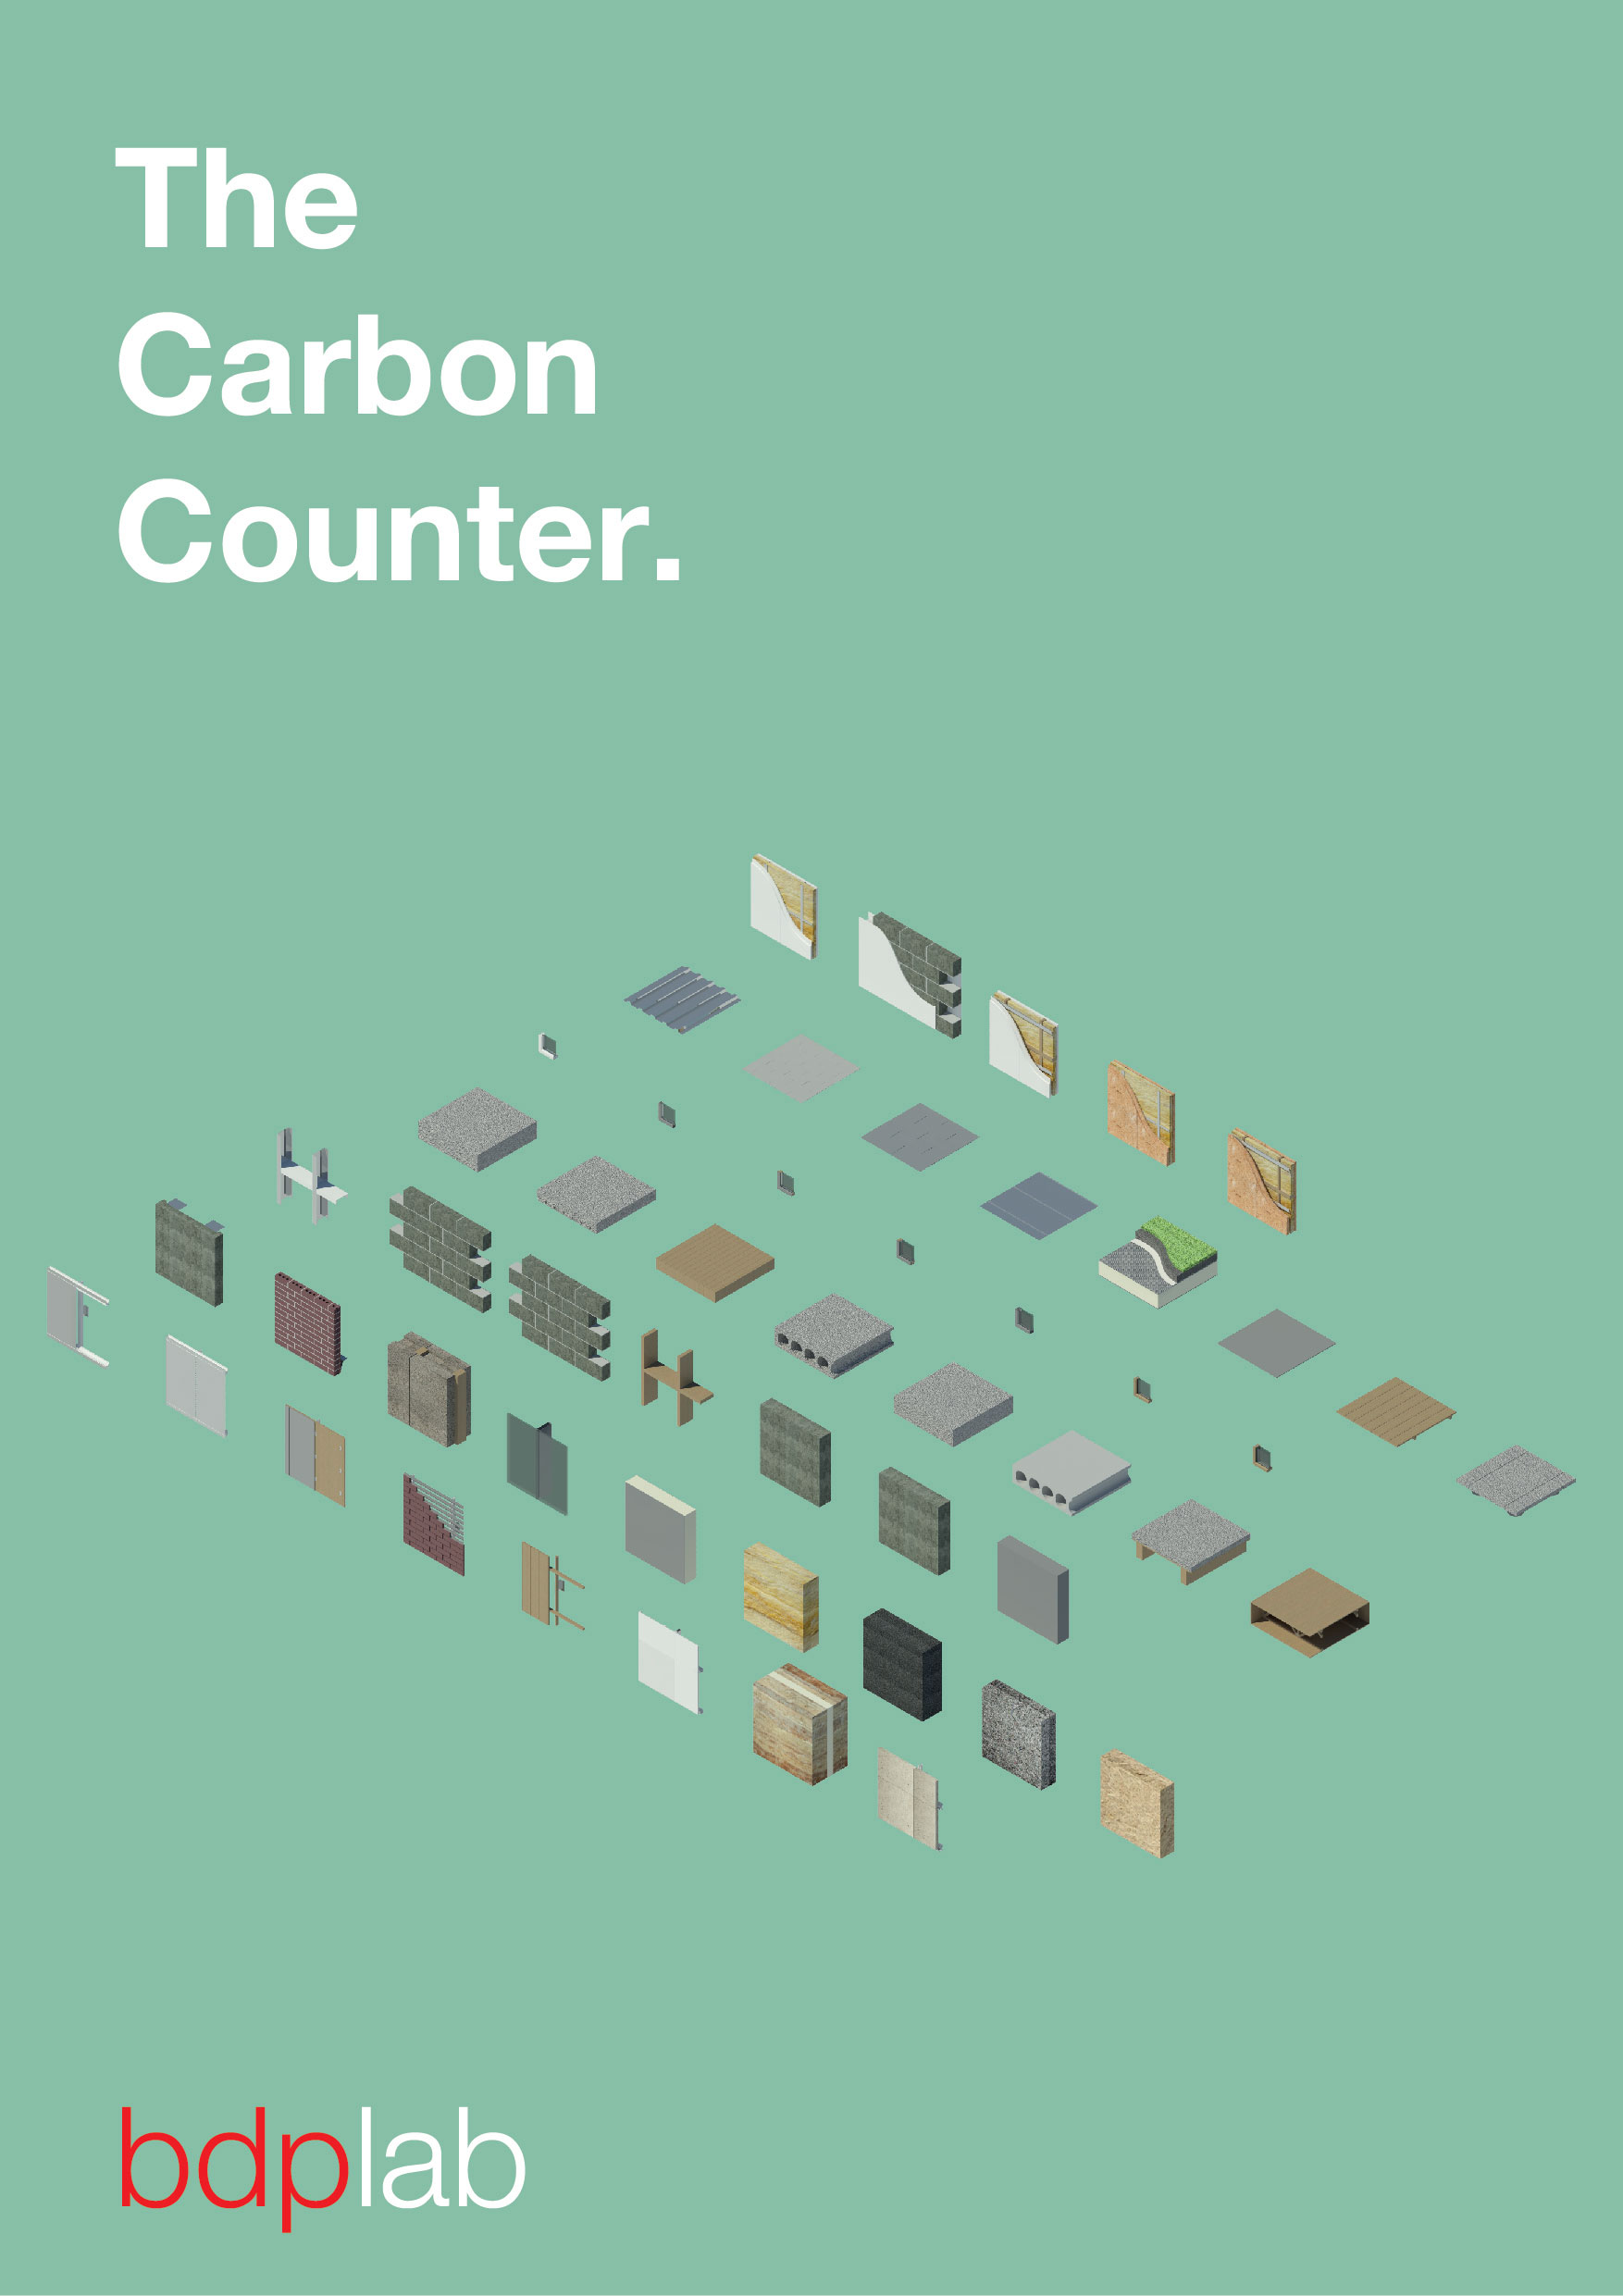 Carbon-Counter-graphics-01.jpg